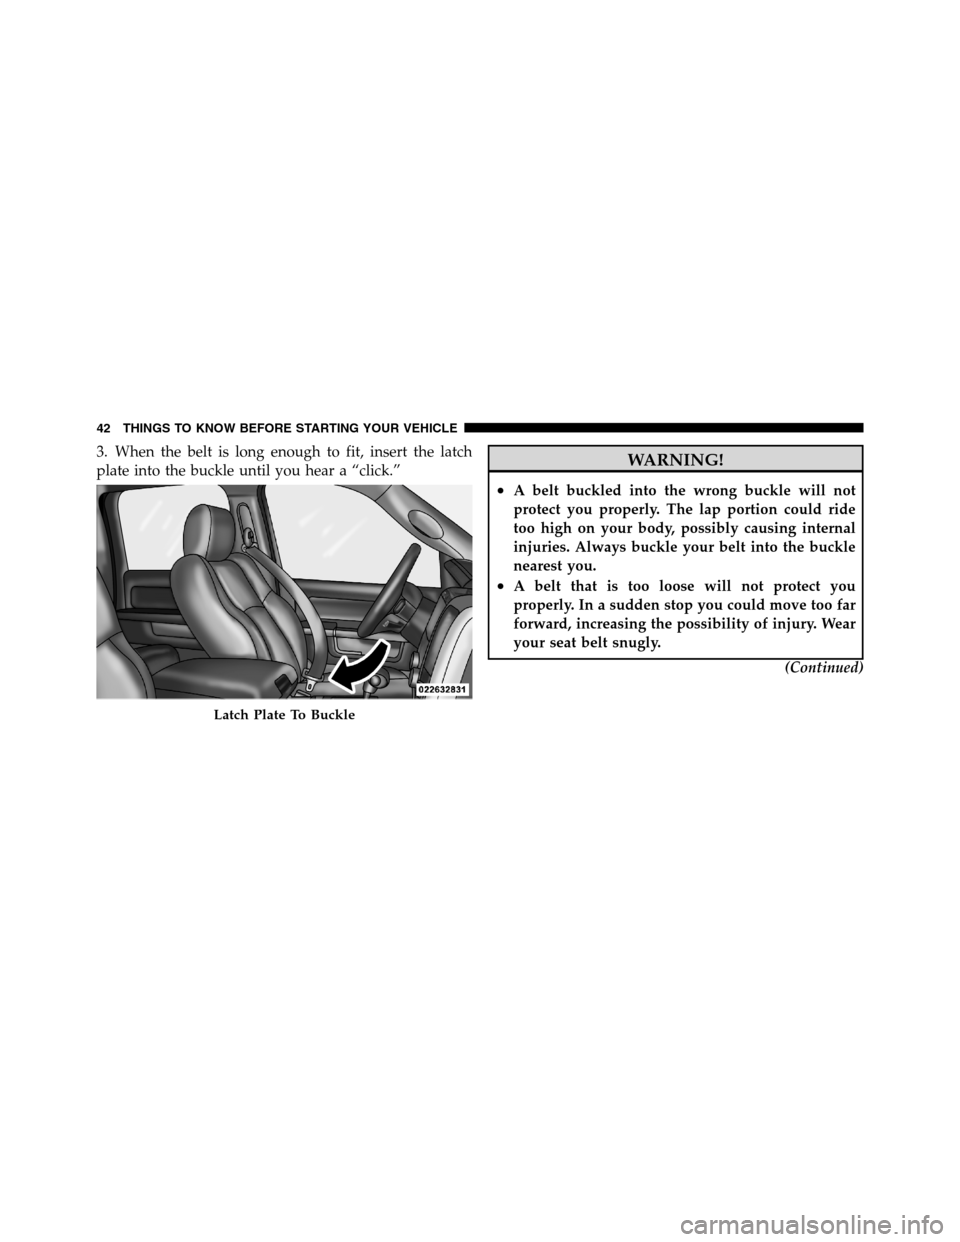 Ram 2500 2011 Service Manual 3. When the belt is long enough to fit, insert the latch
plate into the buckle until you hear a “click.”WARNING!
•A belt buckled into the wrong buckle will not
protect you properly. The lap port